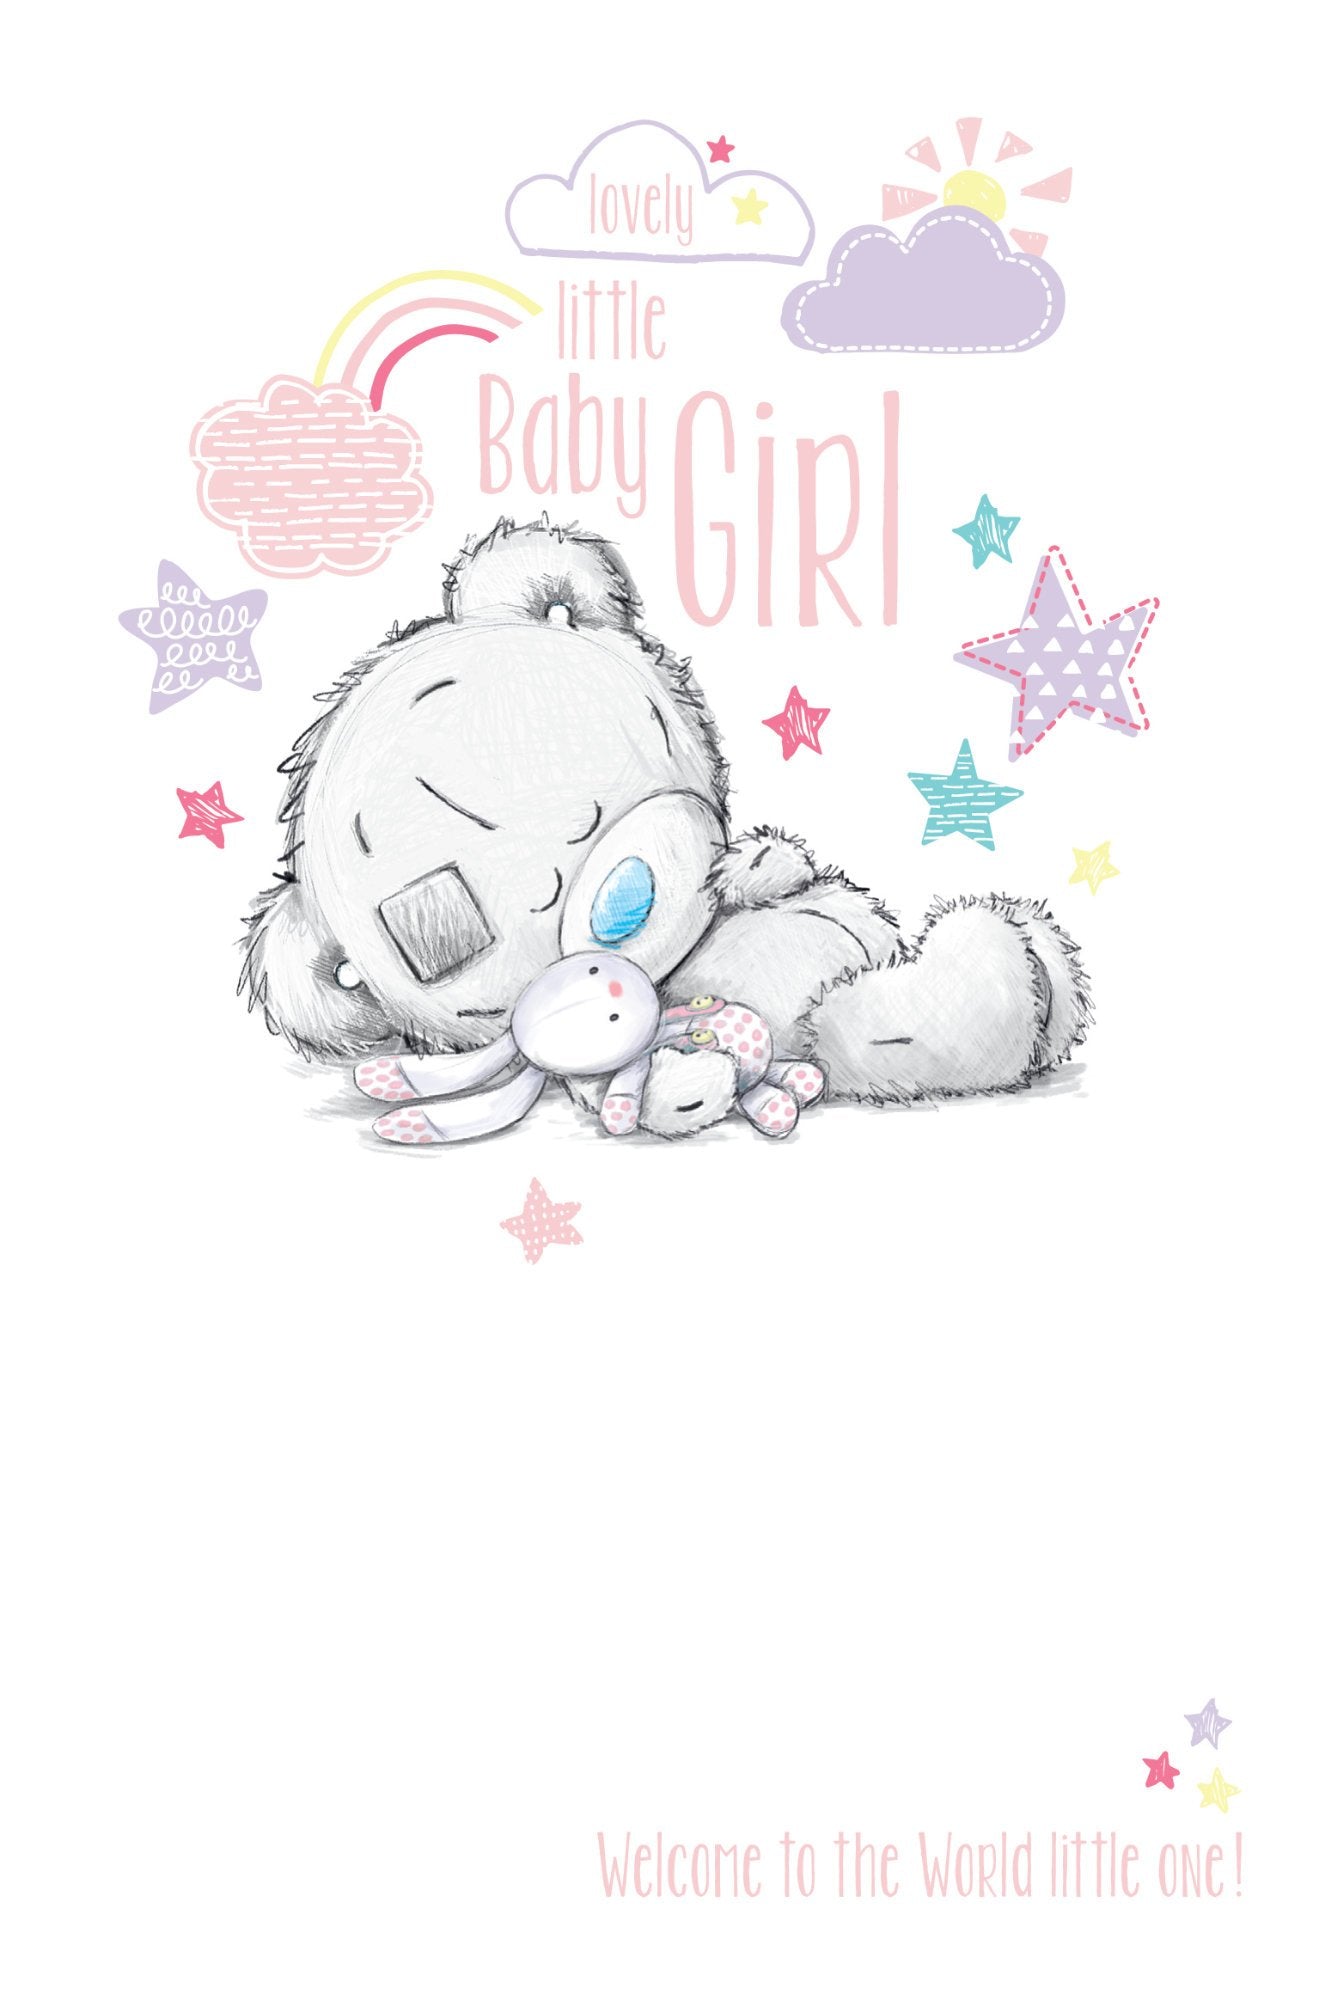 Photograph of Birth of Little Baby Girl Greetings Card at Nicole's Shop